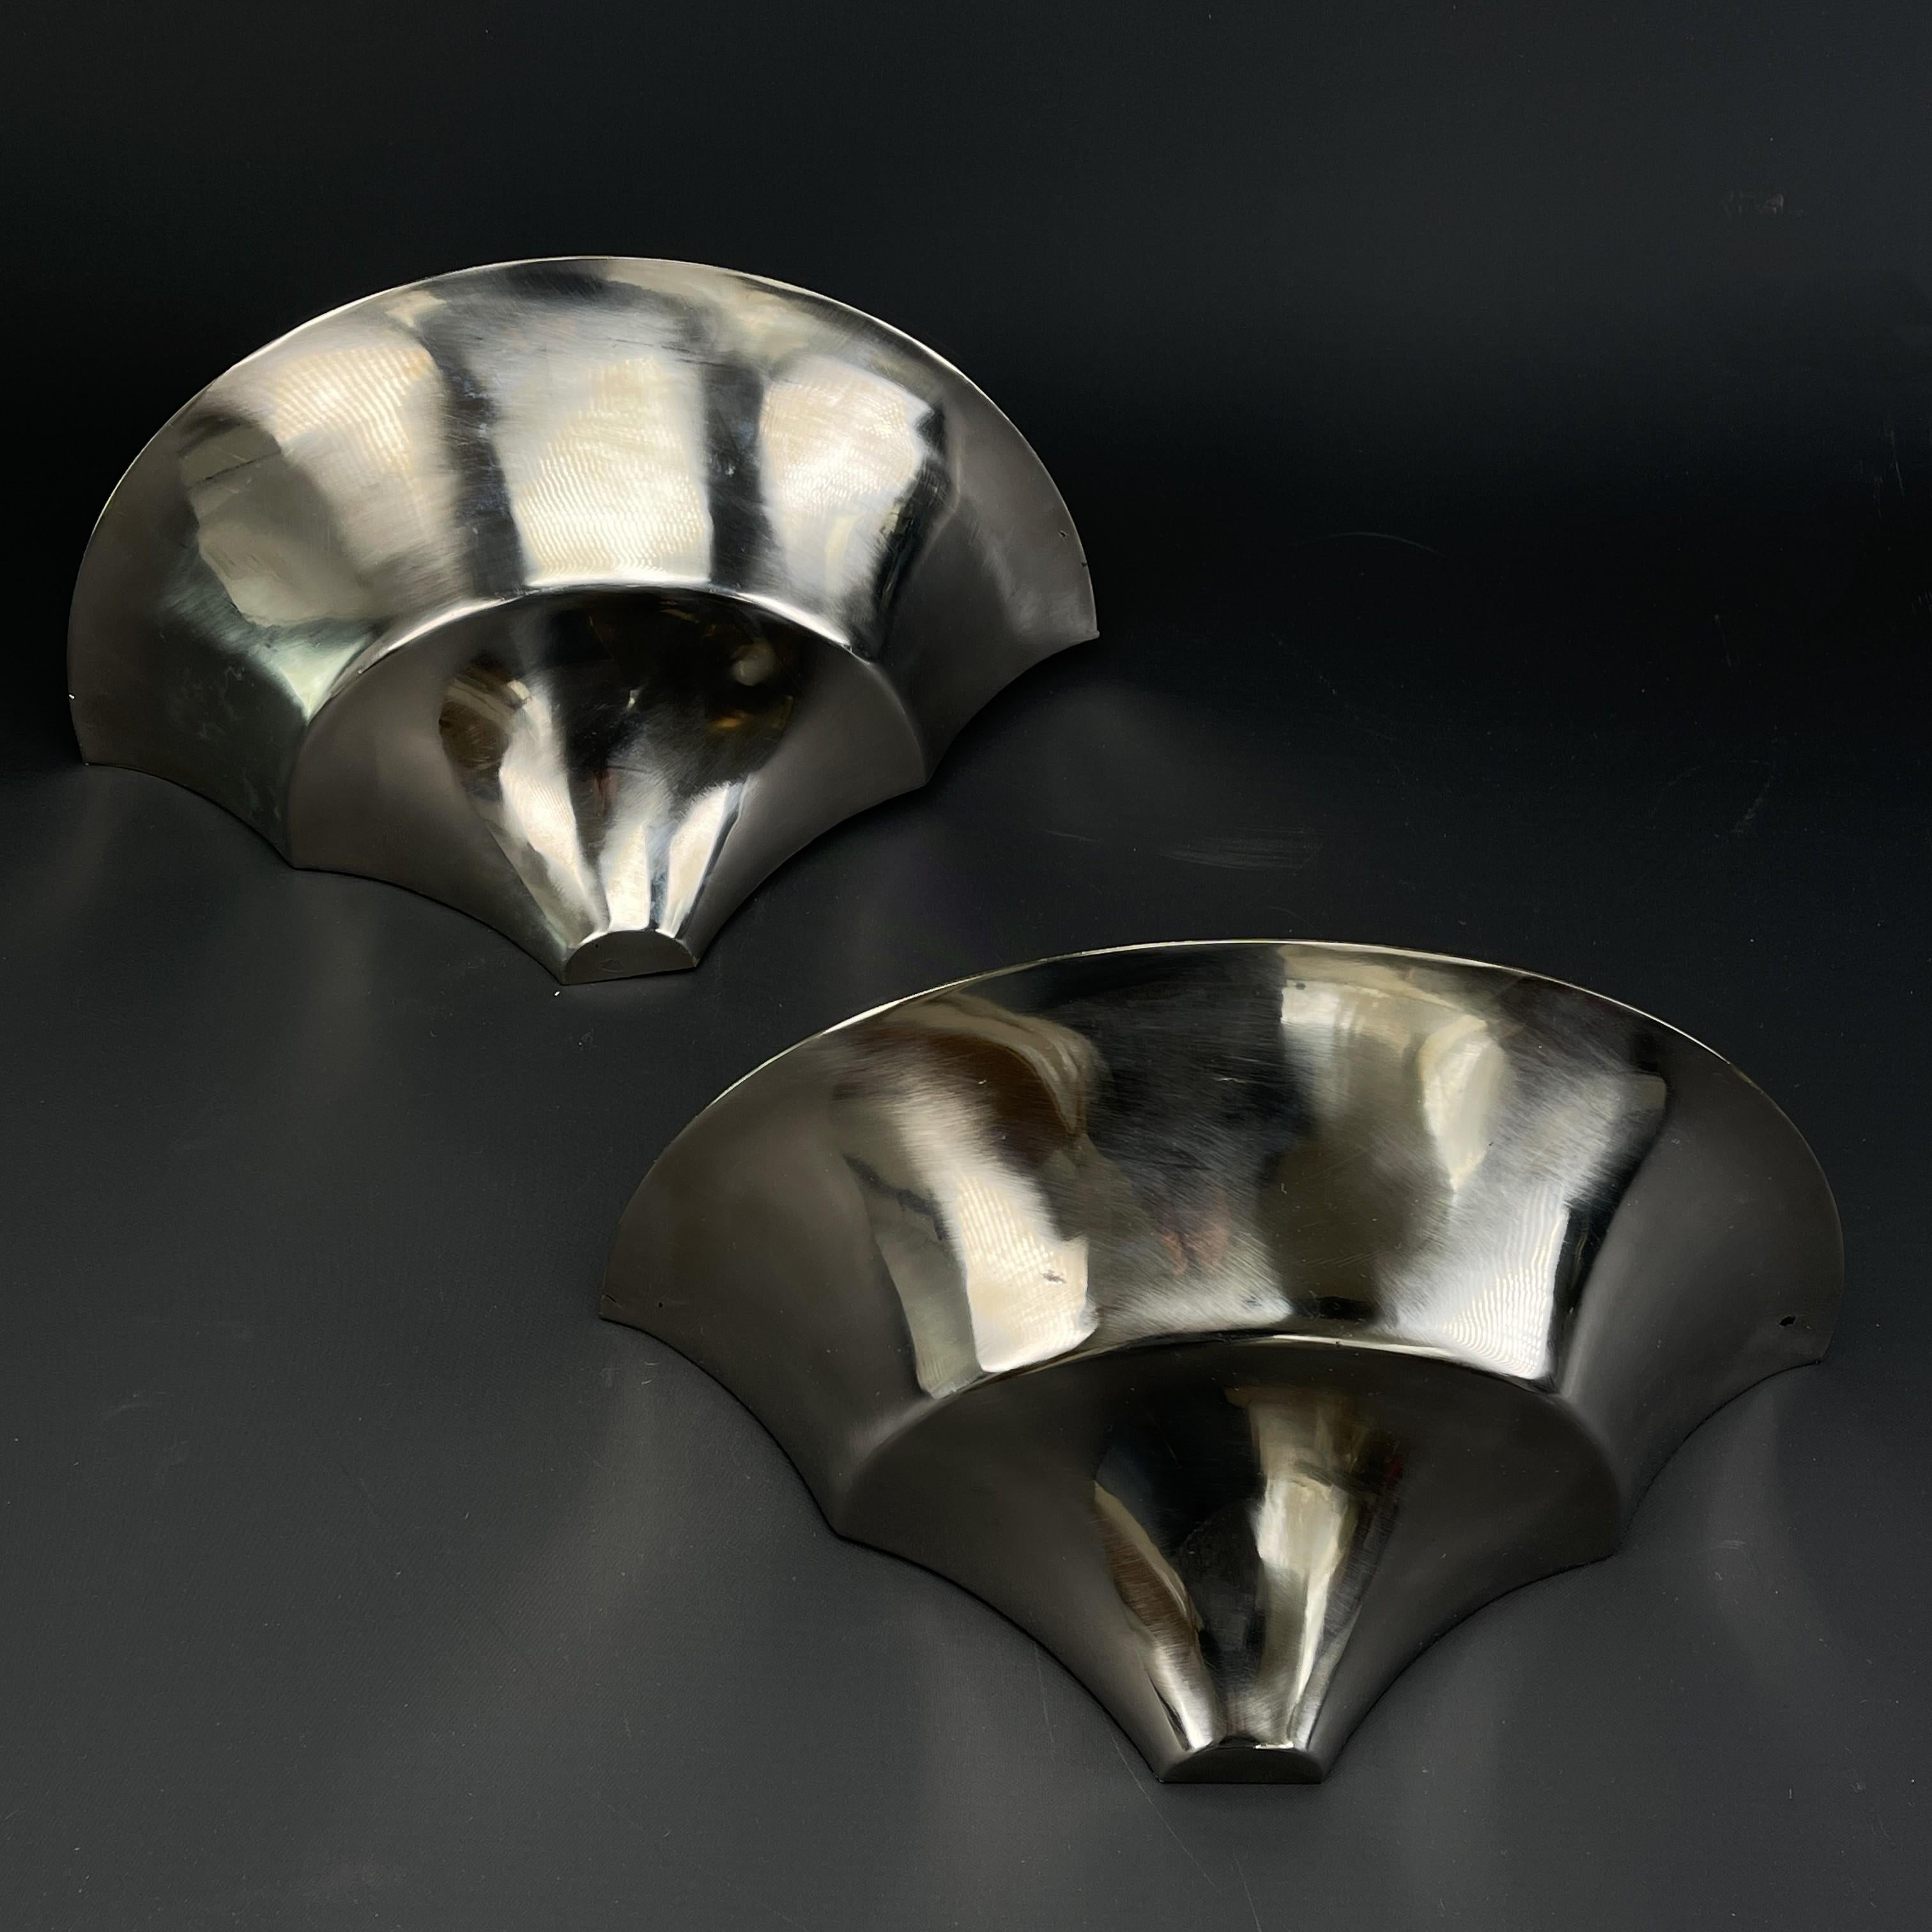 Pair Art Deco sconces, 1930s

These original ART DECO wall lights are characterised by their simple and functional design. The two lamps provide a very pleasant light. These wall lamps are an absolute design classic from the ART DECO period.

The